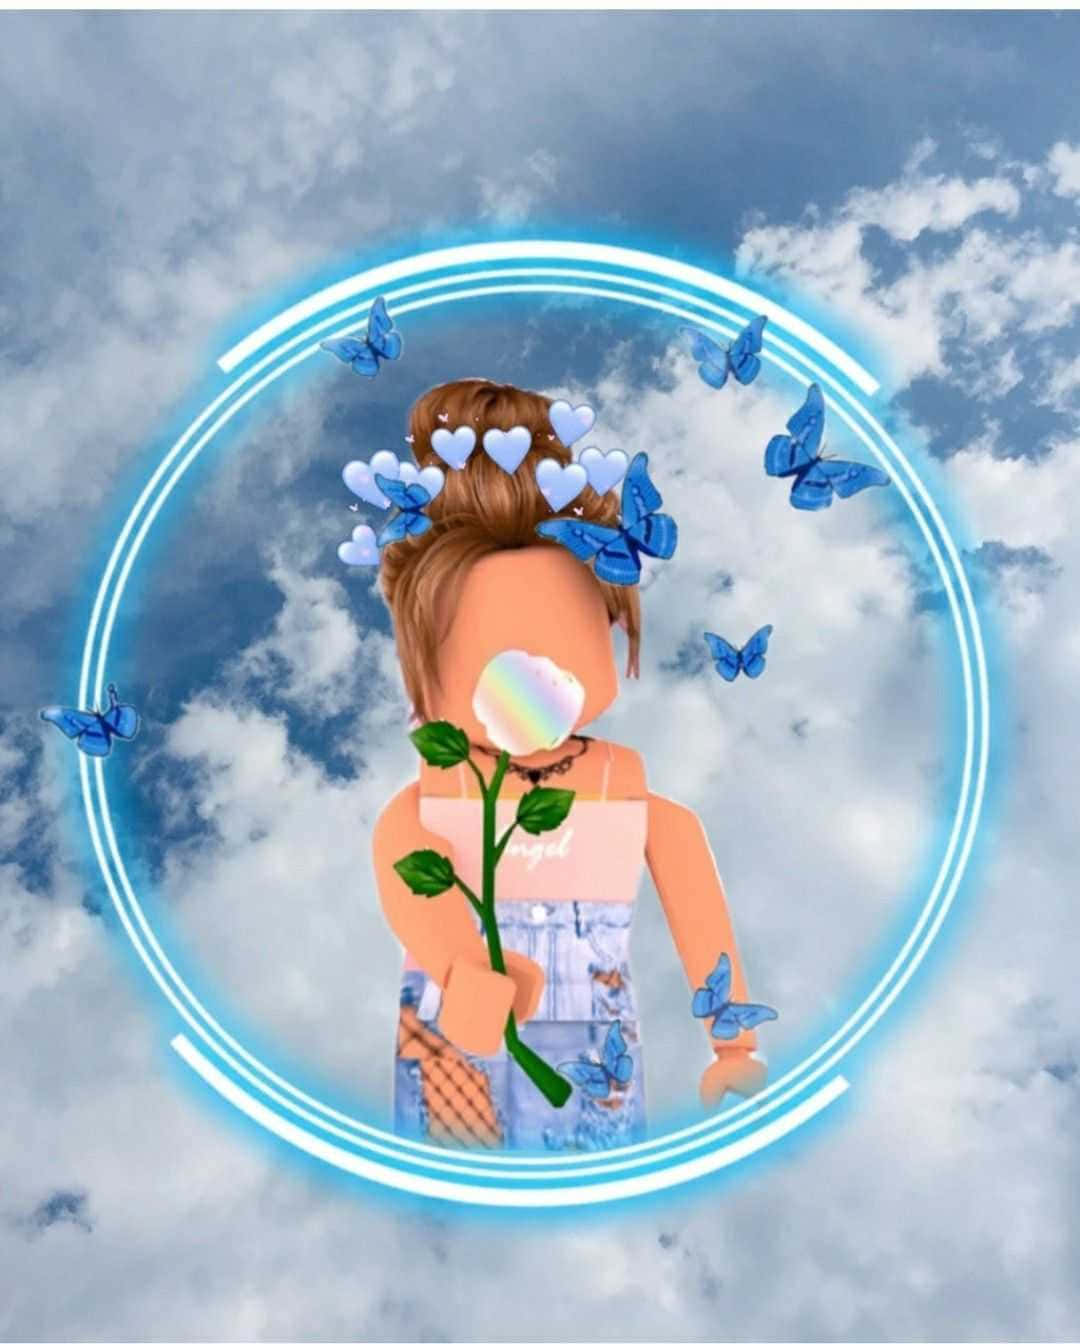 Aesthetic Roblox Wallpaper with Flower Crown and Peaceful Gaze